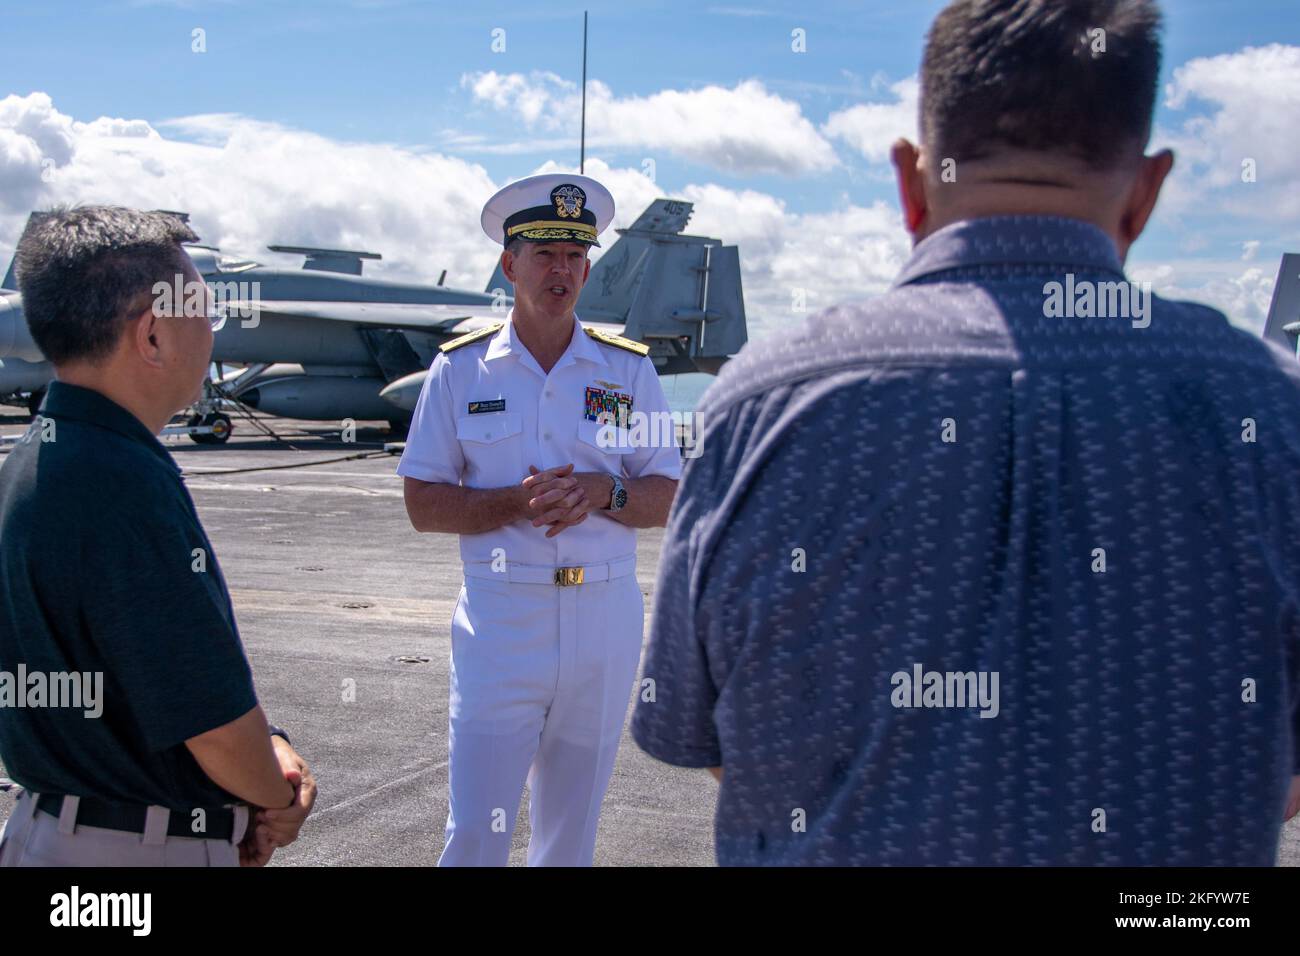 221015-N-RC359-1051 MANILA BAY (Oct. 15, 2022) Rear Adm. Buzz Donnelly, commander, Carrier Strike Group (CSG) 5 speaks with Mr. Augusto D. dela Pena, undersecretary for the department of environment and natural resources, left and Philippine Coast Guard Rear Adm. Charlie Rances, during a tour of the flight deck aboard the U.S. Navy’s only forward-deployed aircraft carrier USS Ronald Reagan (CVN 76) while at anchor in Manila Bay, Philippines, Oct. 15. Ronald Reagan, the flagship of CSG 5, provides a combat-ready force that protects and defends the United States, and supports alliances, partners Stock Photo